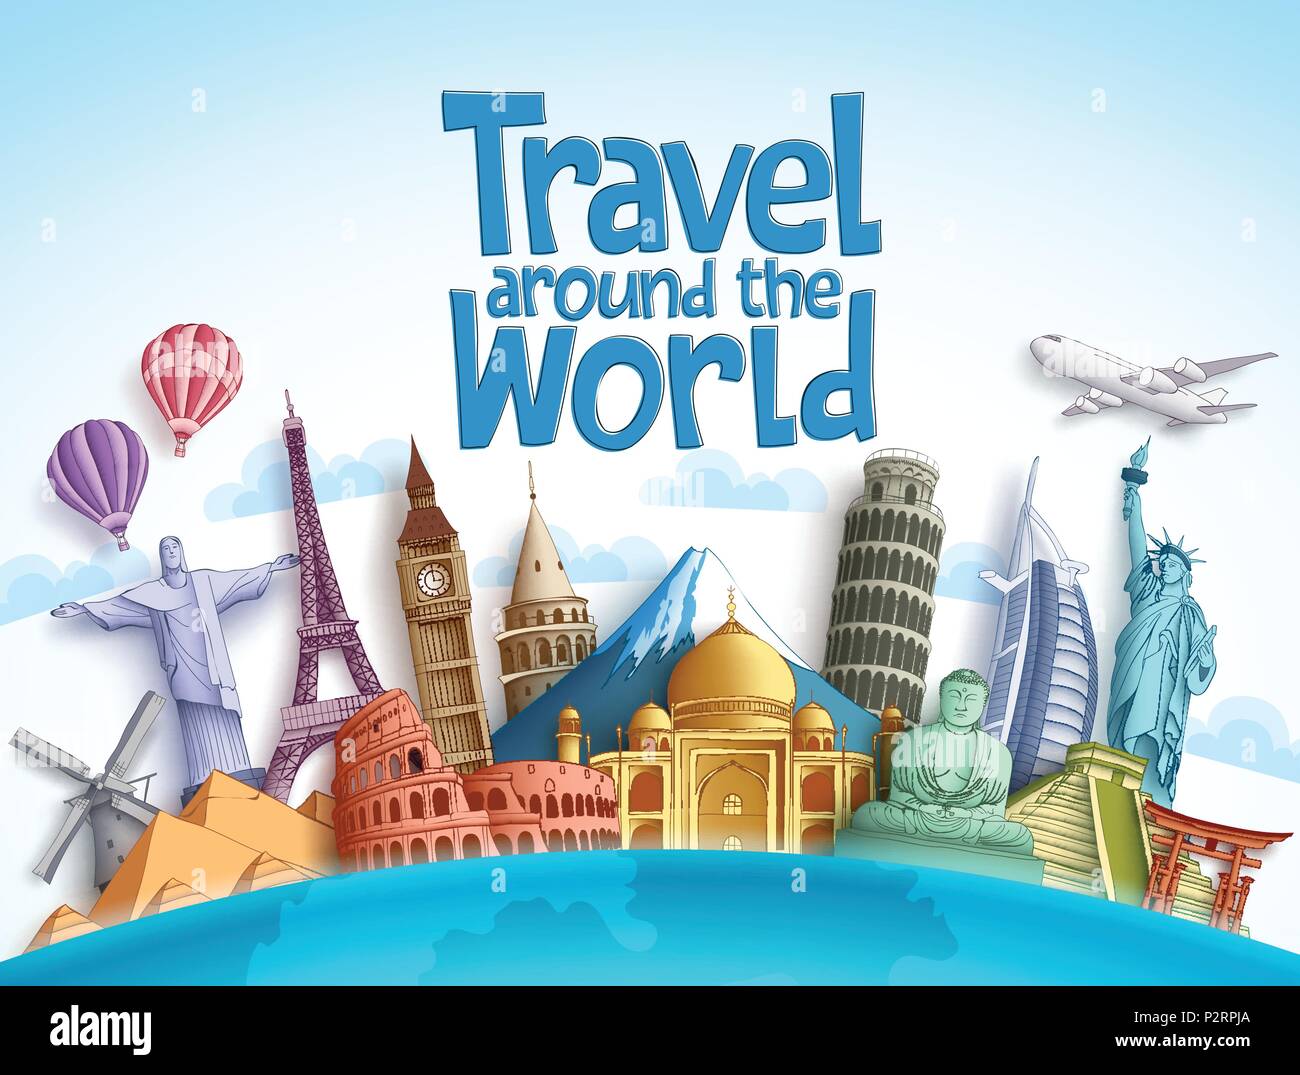 Travel around the world vector design with famous landmarks and tourist ...